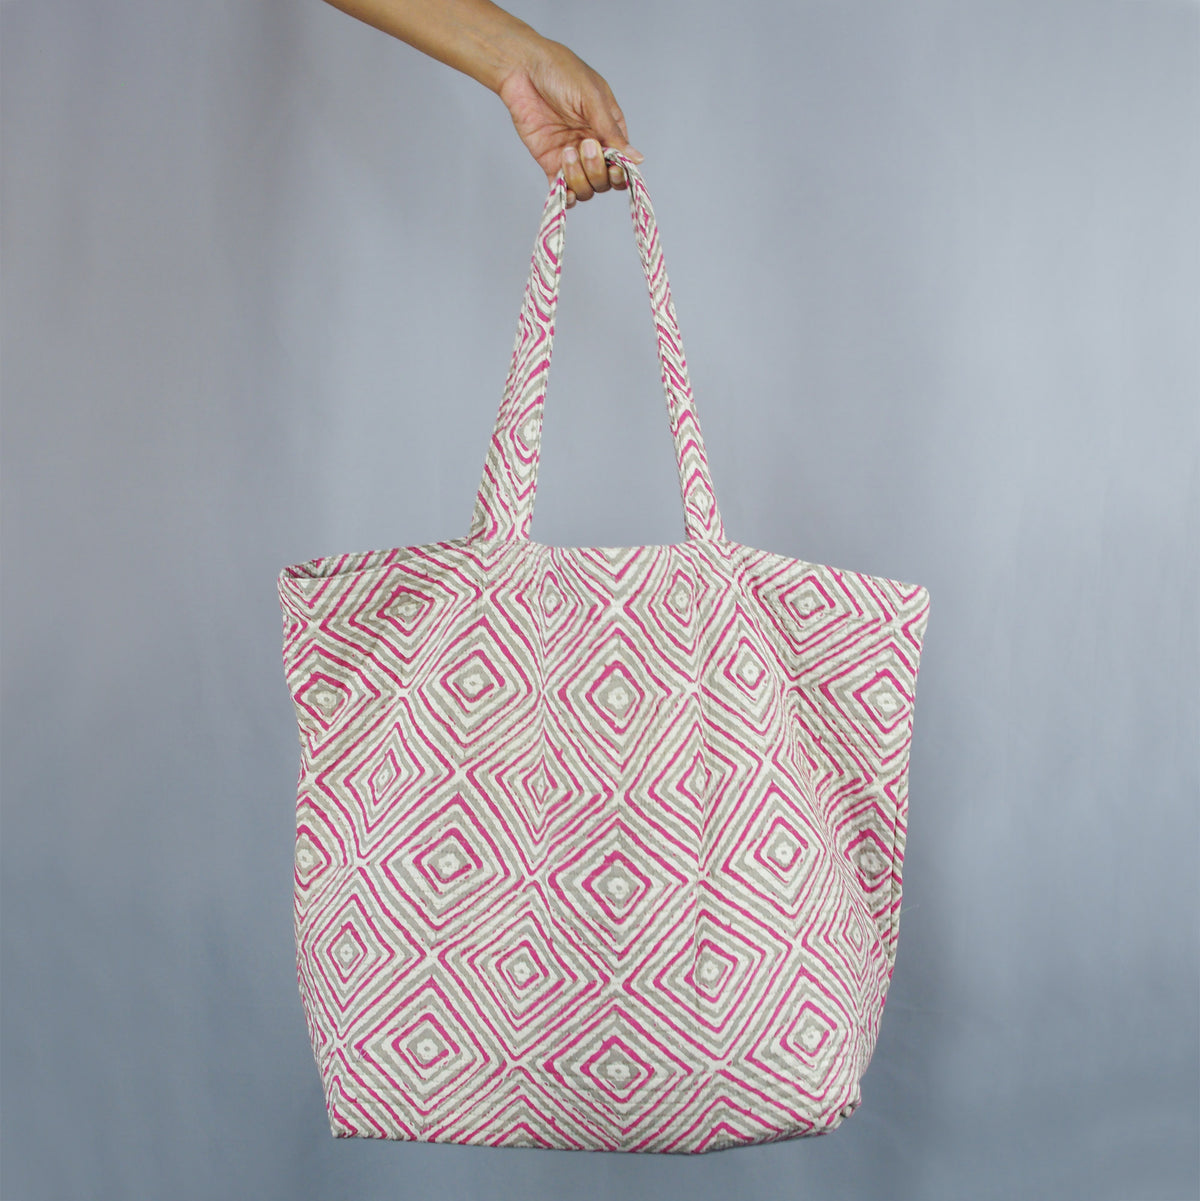 Cotton Quilted Large Shoppping / Beach Bag - Pink Grey Diamonds